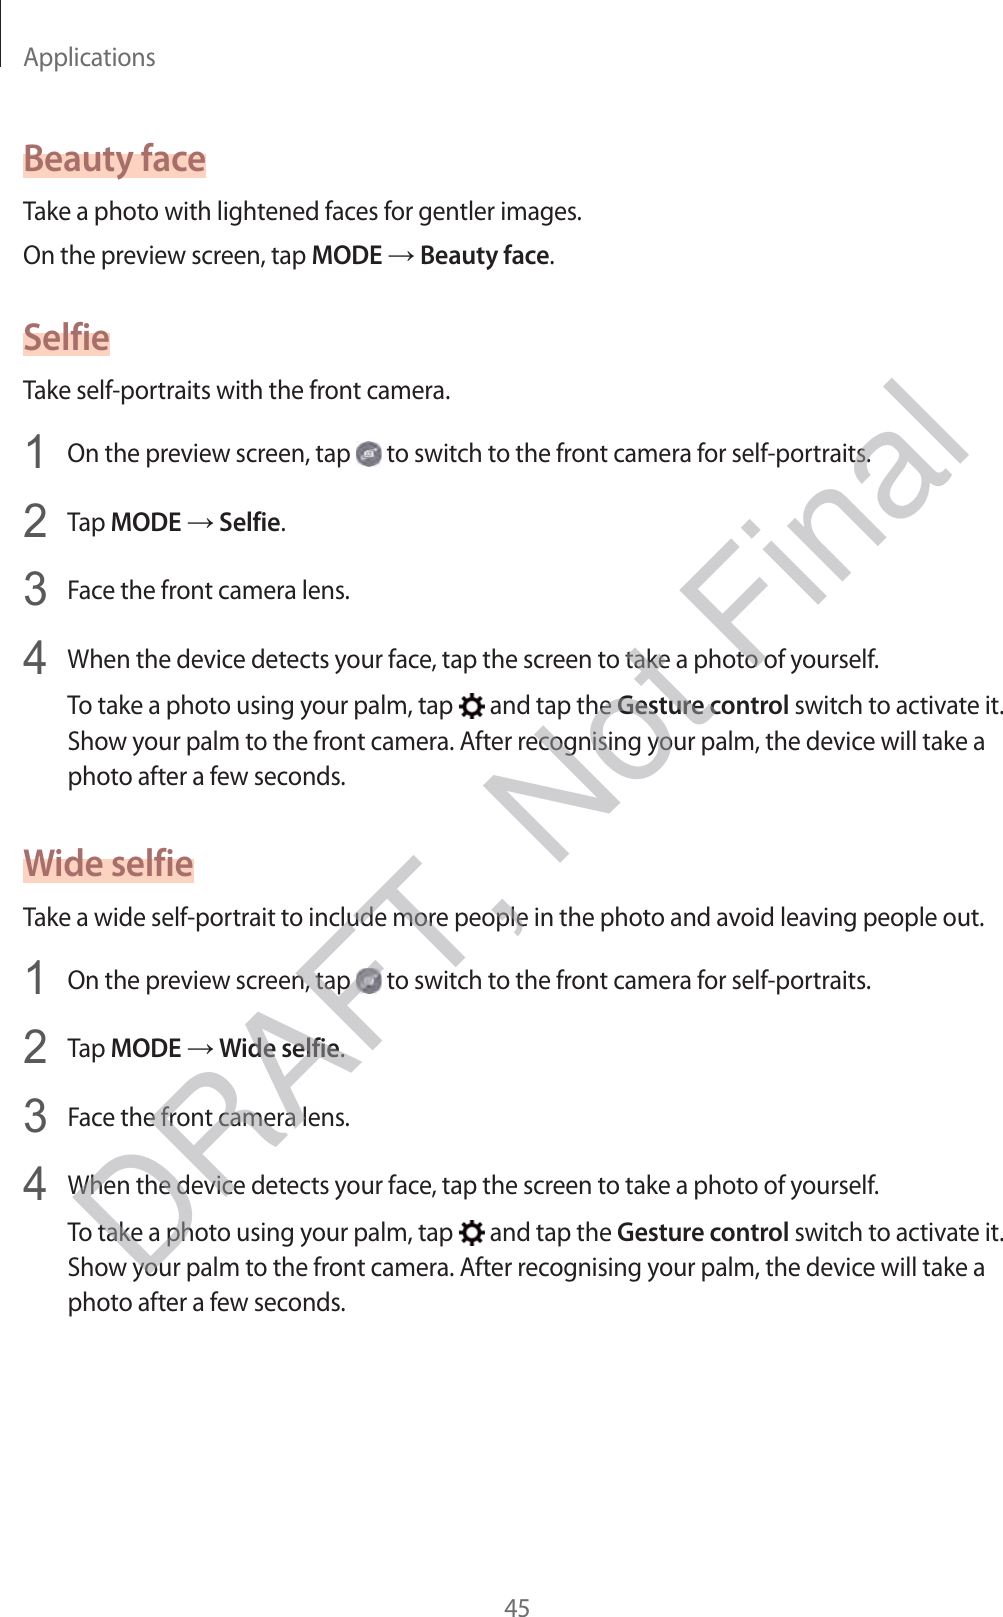 Applications45Beauty faceTake a photo with lightened faces for gentler images.On the preview screen, tap MODE → Beauty face.SelfieTake self-portraits with the front camera.1 On the preview screen, tap   to switch to the front camera for self-portraits.2 Tap MODE → Selfie.3 Face the front camera lens.4 When the device detects your face, tap the screen to take a photo of yourself.To take a photo using your palm, tap   and tap the Gesture control switch to activate it. Show your palm to the front camera. After recognising your palm, the device will take a photo after a few seconds.Wide selfieTake a wide self-portrait to include more people in the photo and avoid leaving people out.1 On the preview screen, tap   to switch to the front camera for self-portraits.2 Tap MODE → Wide selfie.3 Face the front camera lens.4 When the device detects your face, tap the screen to take a photo of yourself.To take a photo using your palm, tap   and tap the Gesture control switch to activate it. Show your palm to the front camera. After recognising your palm, the device will take a photo after a few seconds.DRAFT, Not Final